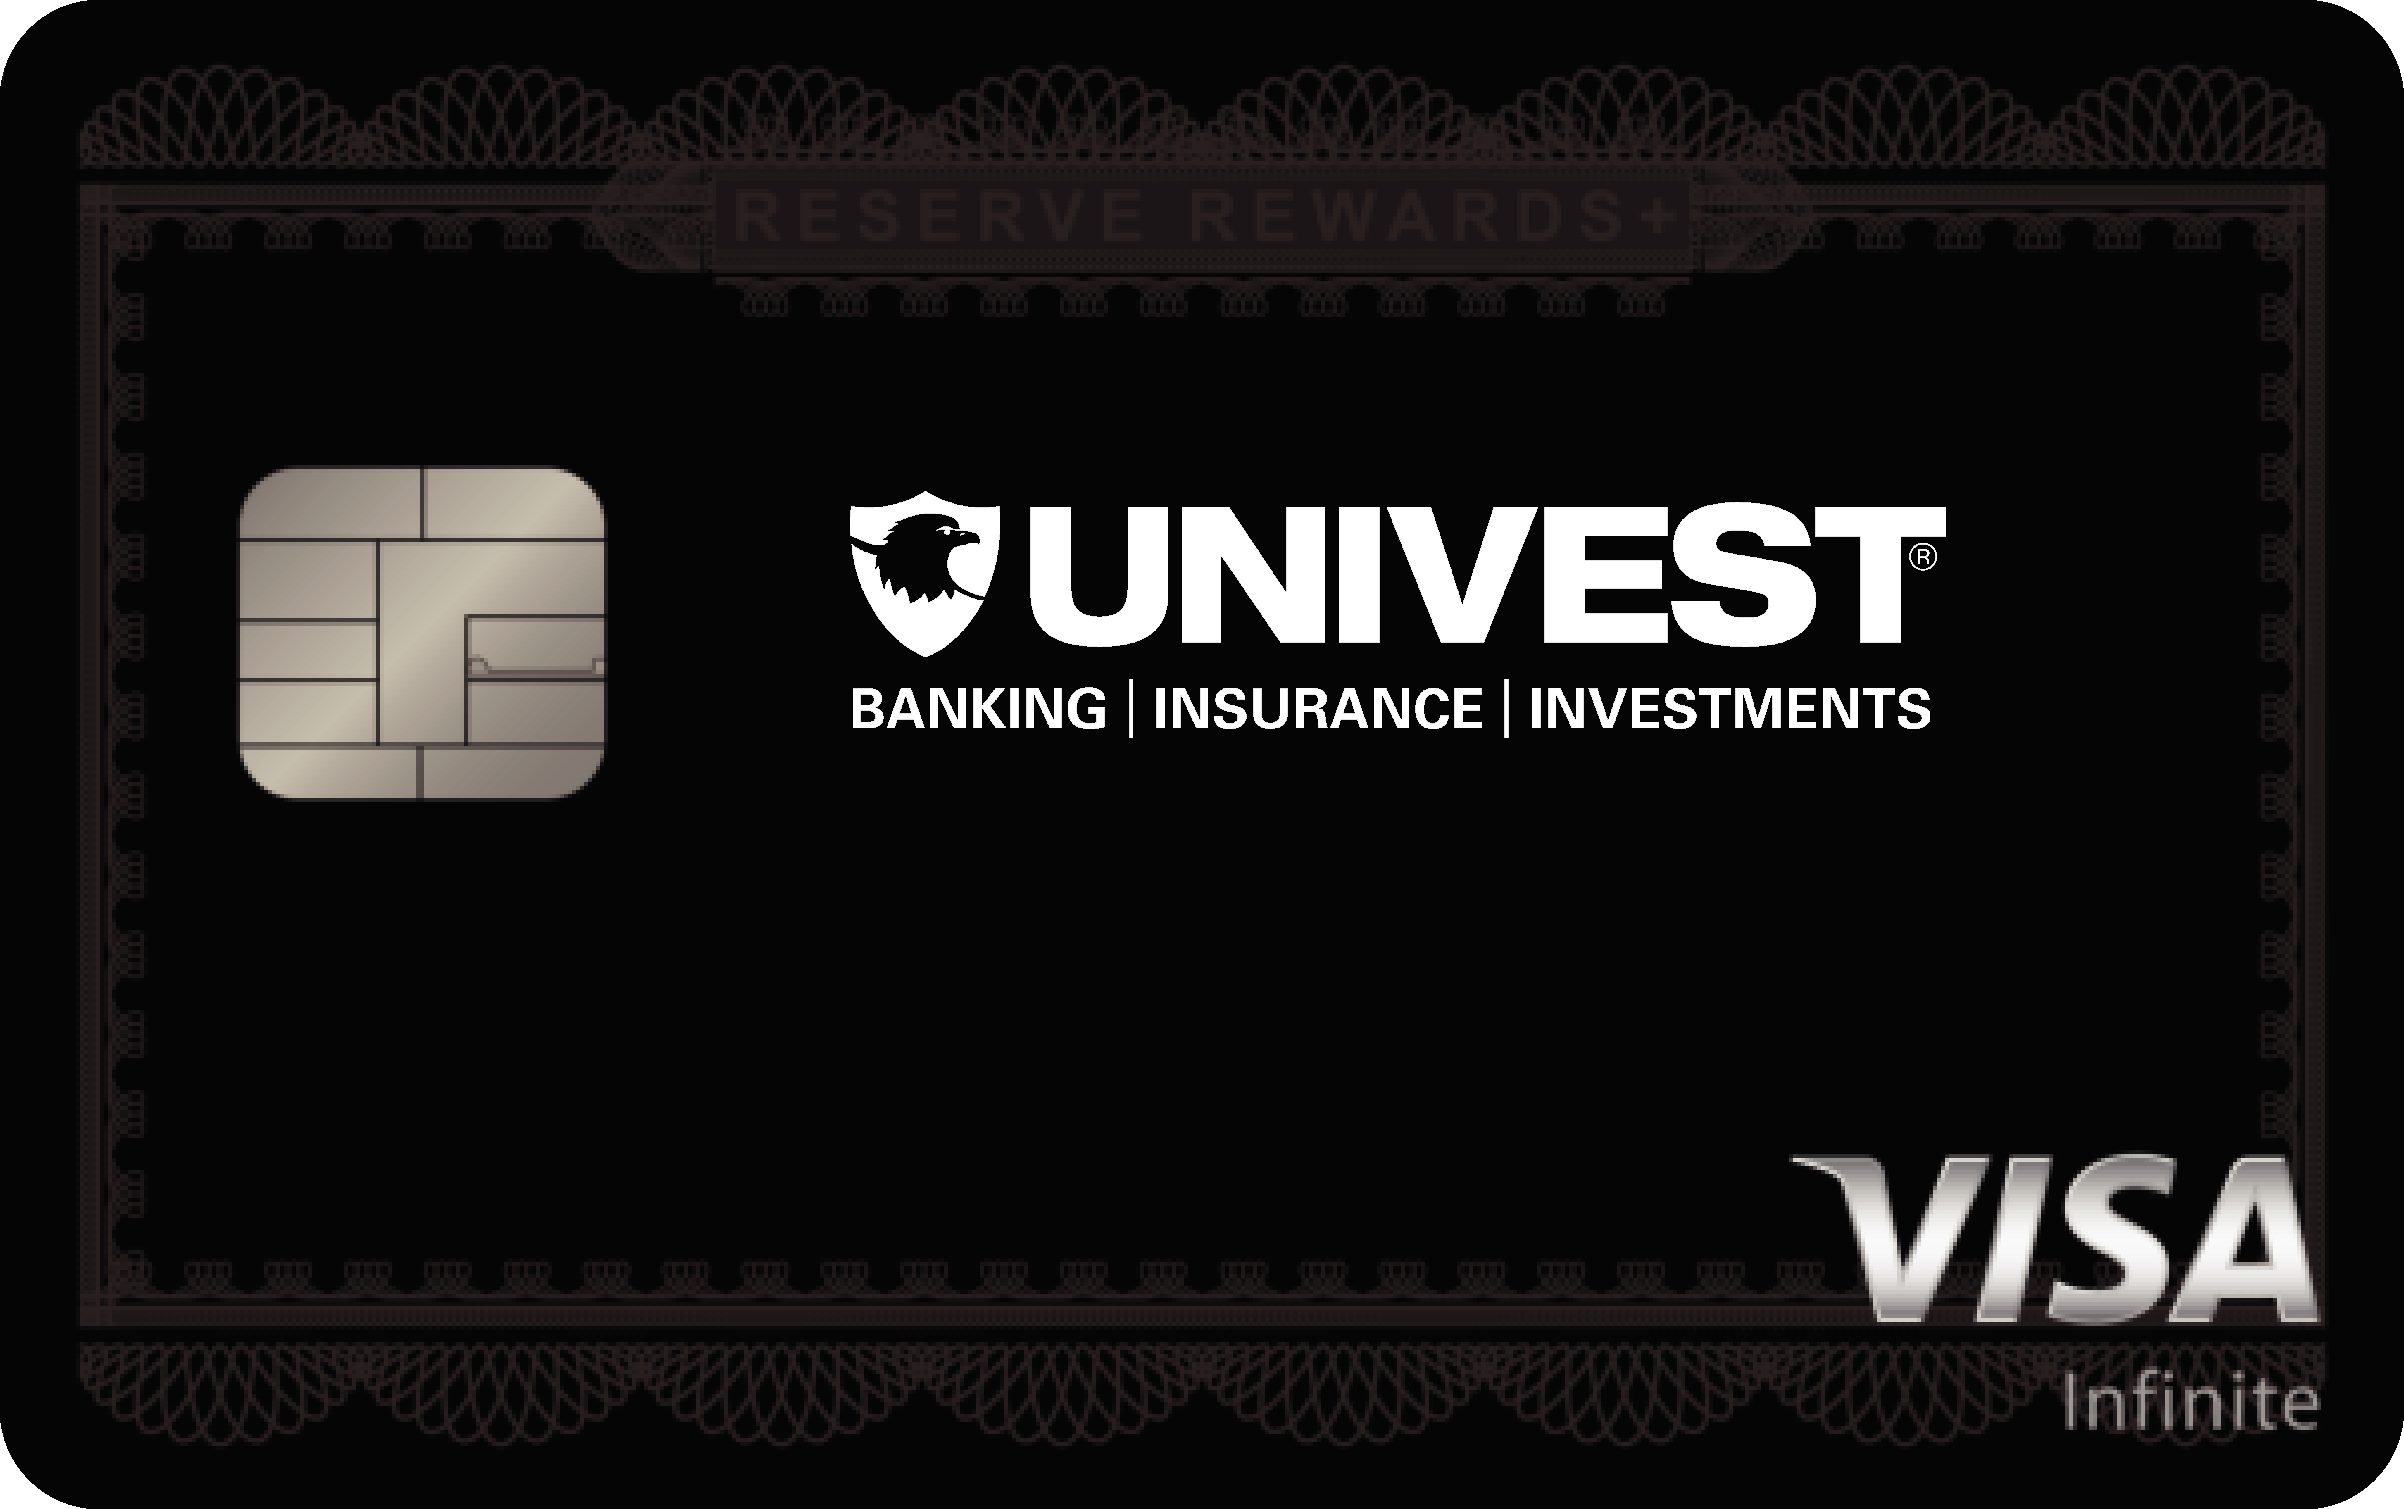 Univest Bank and Trust Co.